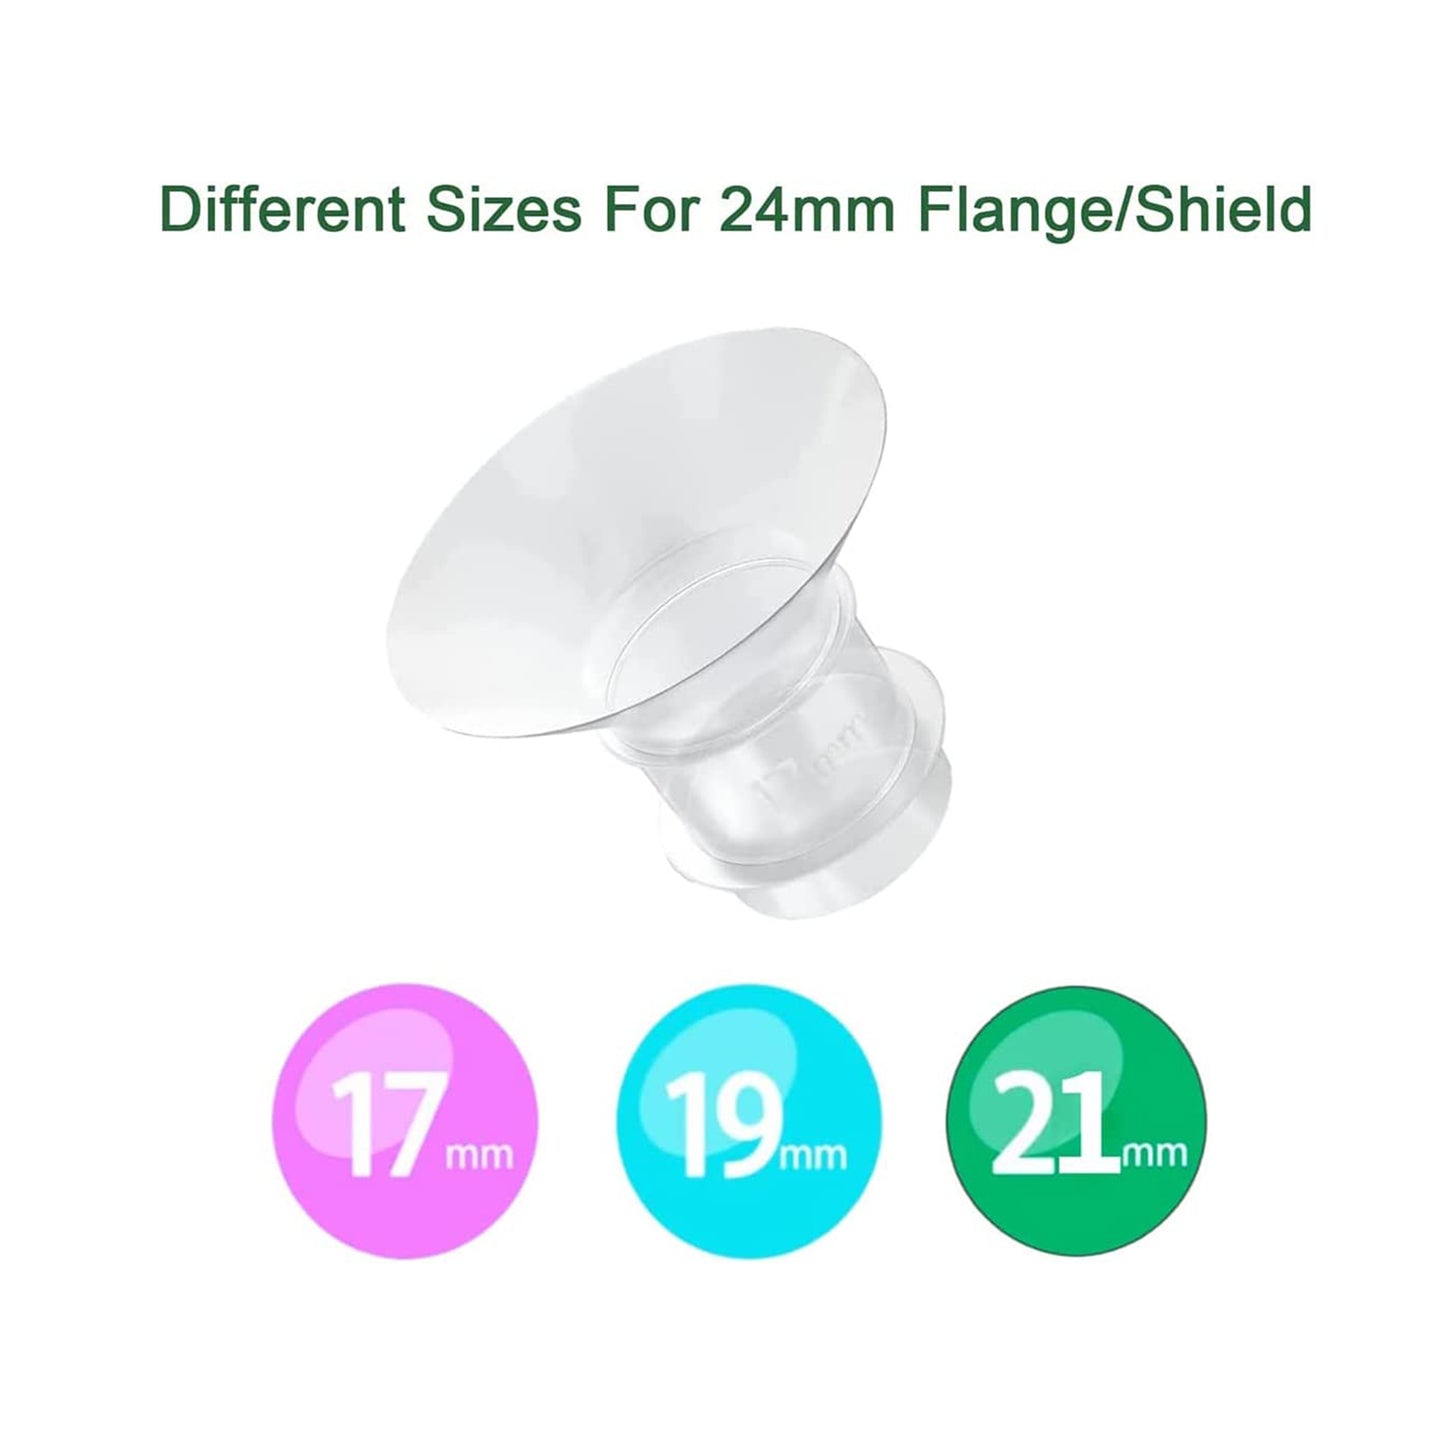 Mamomy Flange Inserts for Medela, Spectra 24 mm Shields/Flanges, Mamomy/Momcozy/Willow Wearable Cup. Compatible with Medela Freestyle 2-pcs